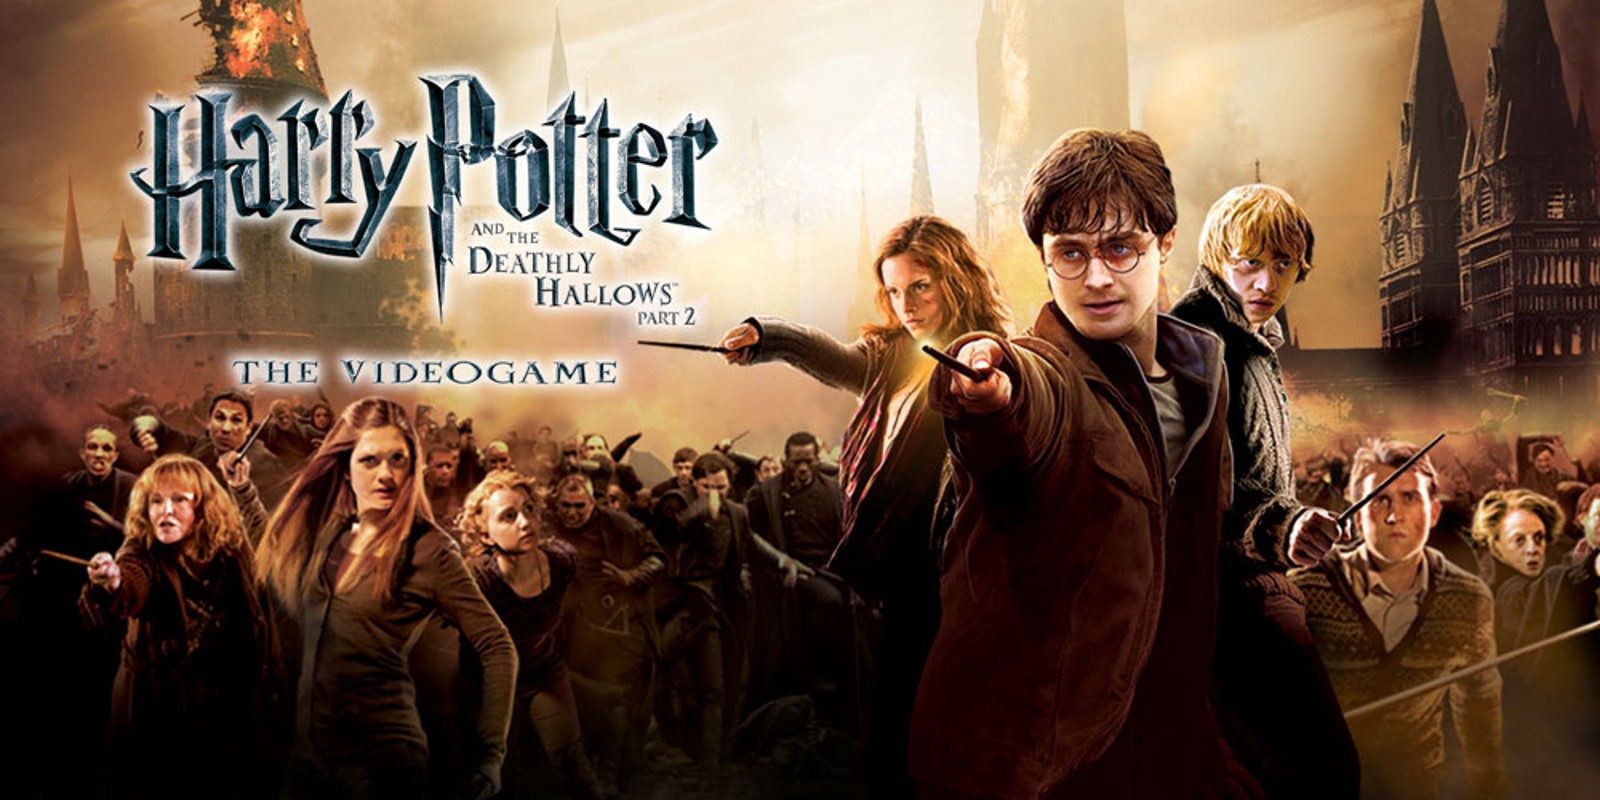 Harry Potter and the Deathly Hallows™ - Part 2